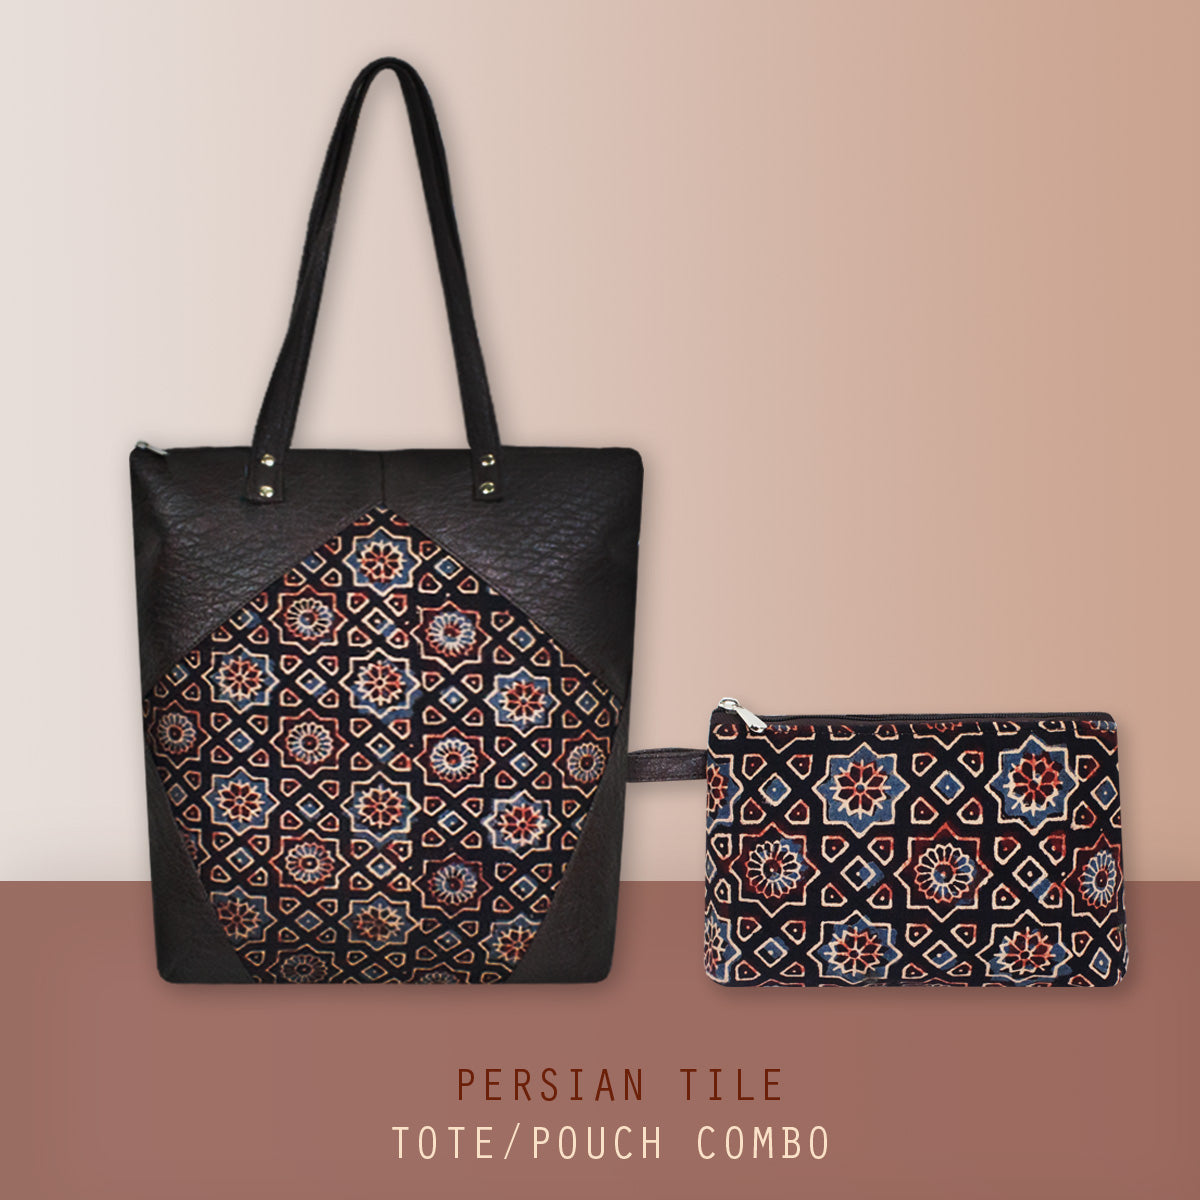 Persian Tile Tote/Pouch Combo